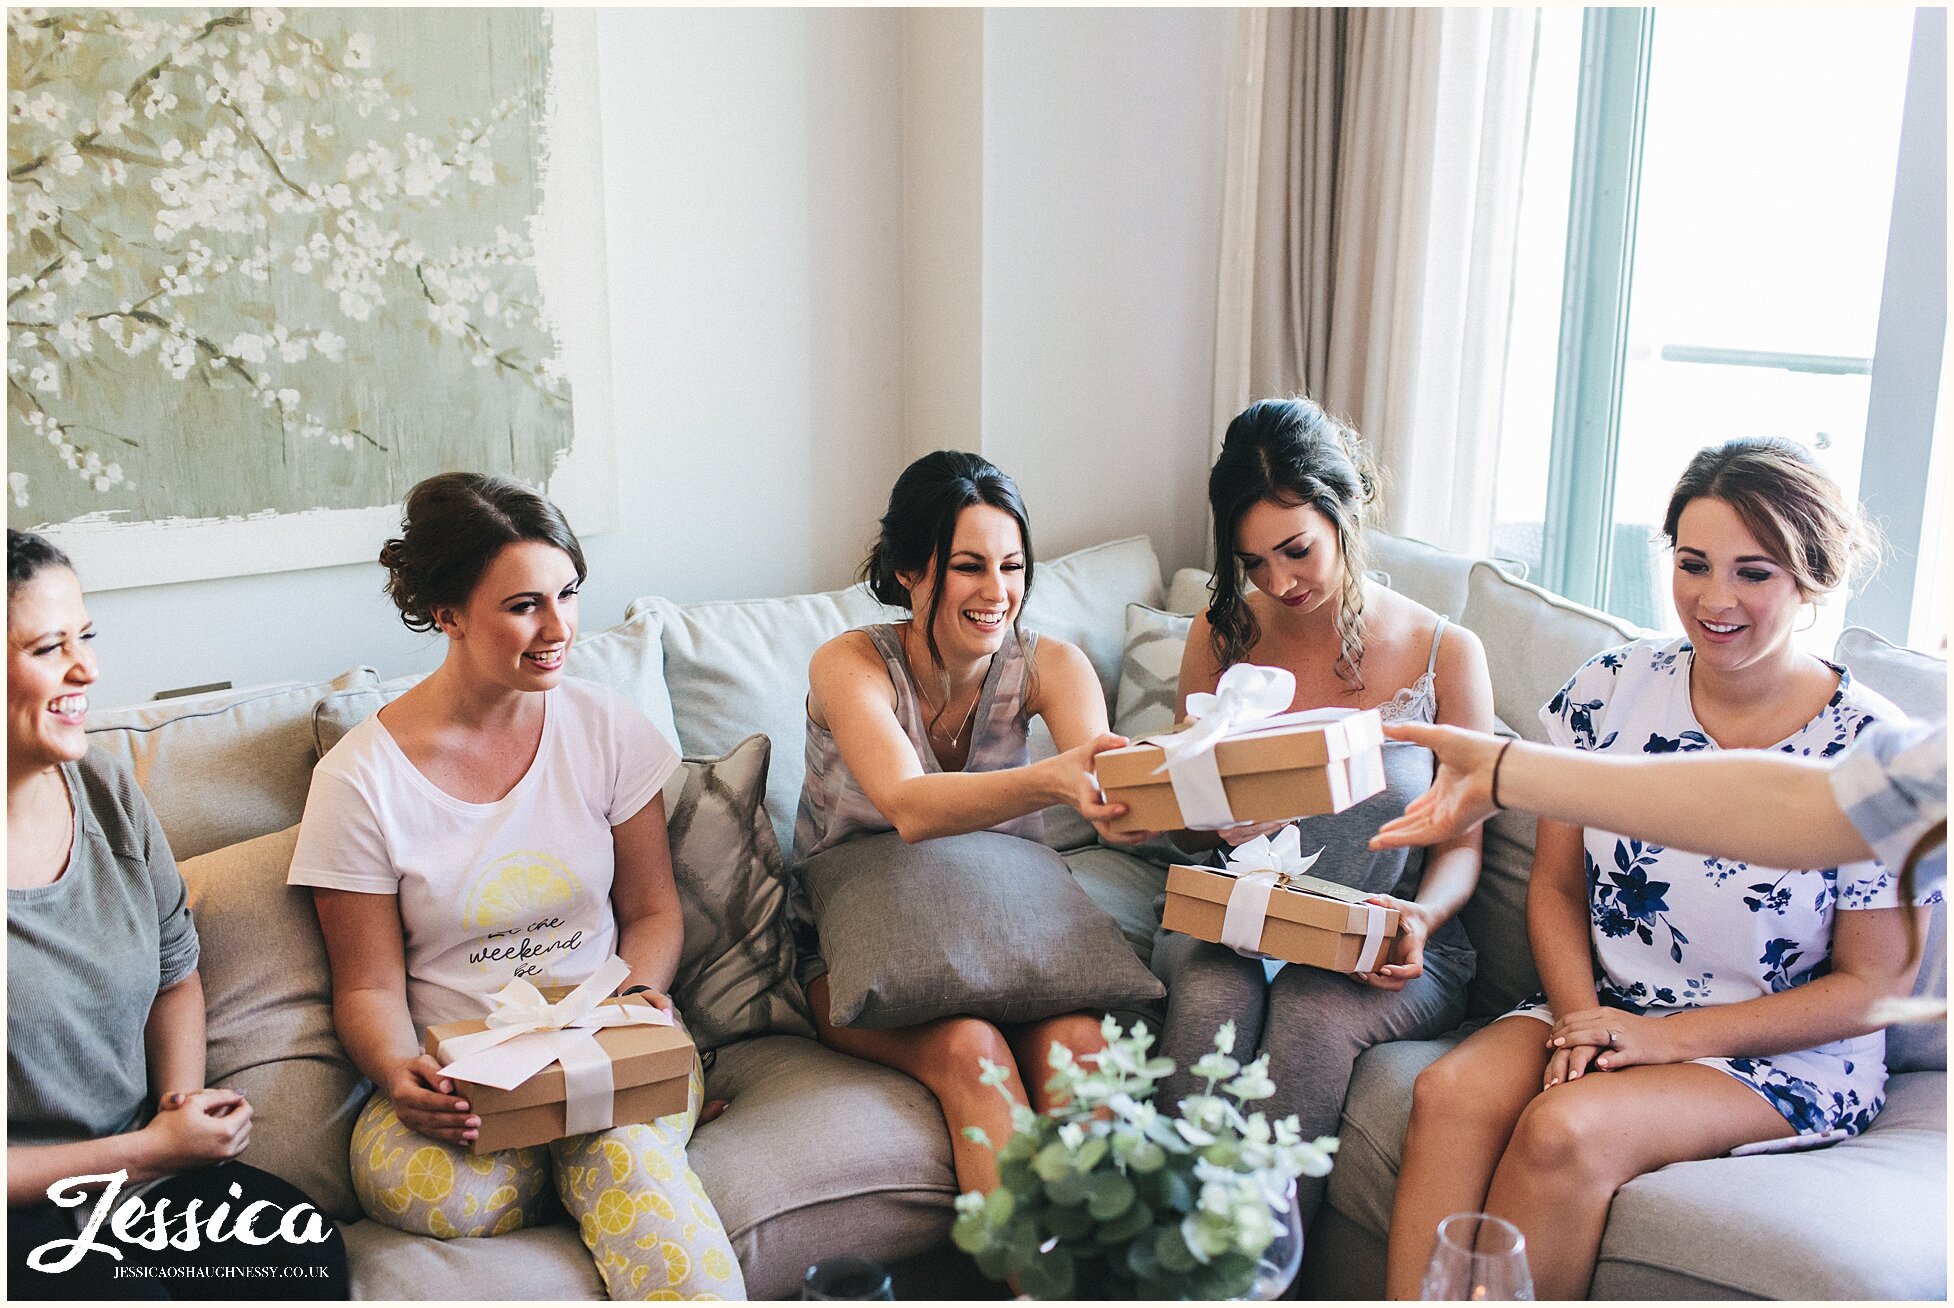 the bride gives her bridesmaids presents before the ceremony